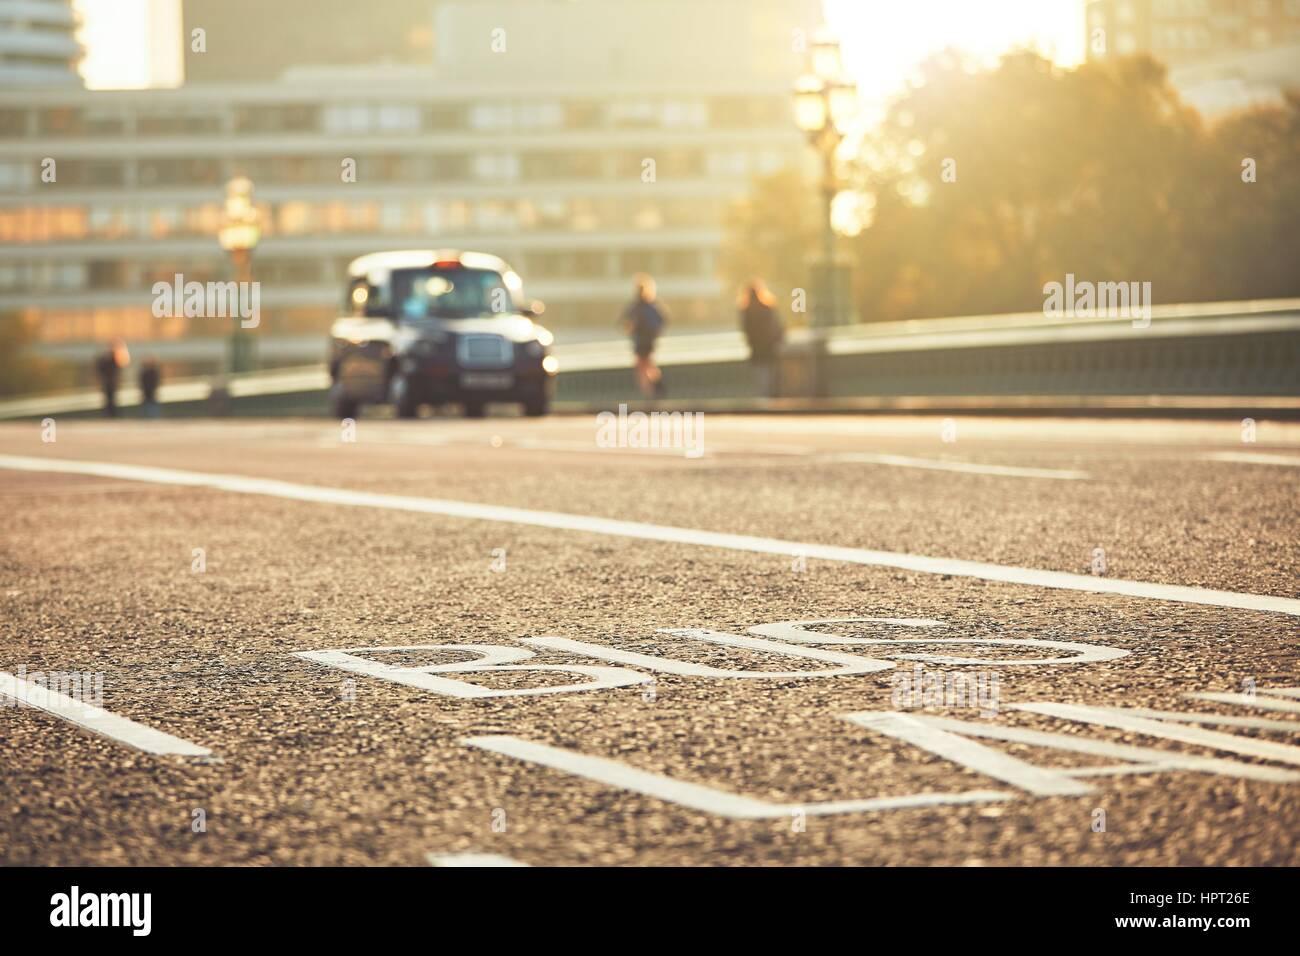 Daily life in the city. Bus lane and black taxi car on the street. London, The United Kingdom of Great Britain and Northern Ireland Stock Photo